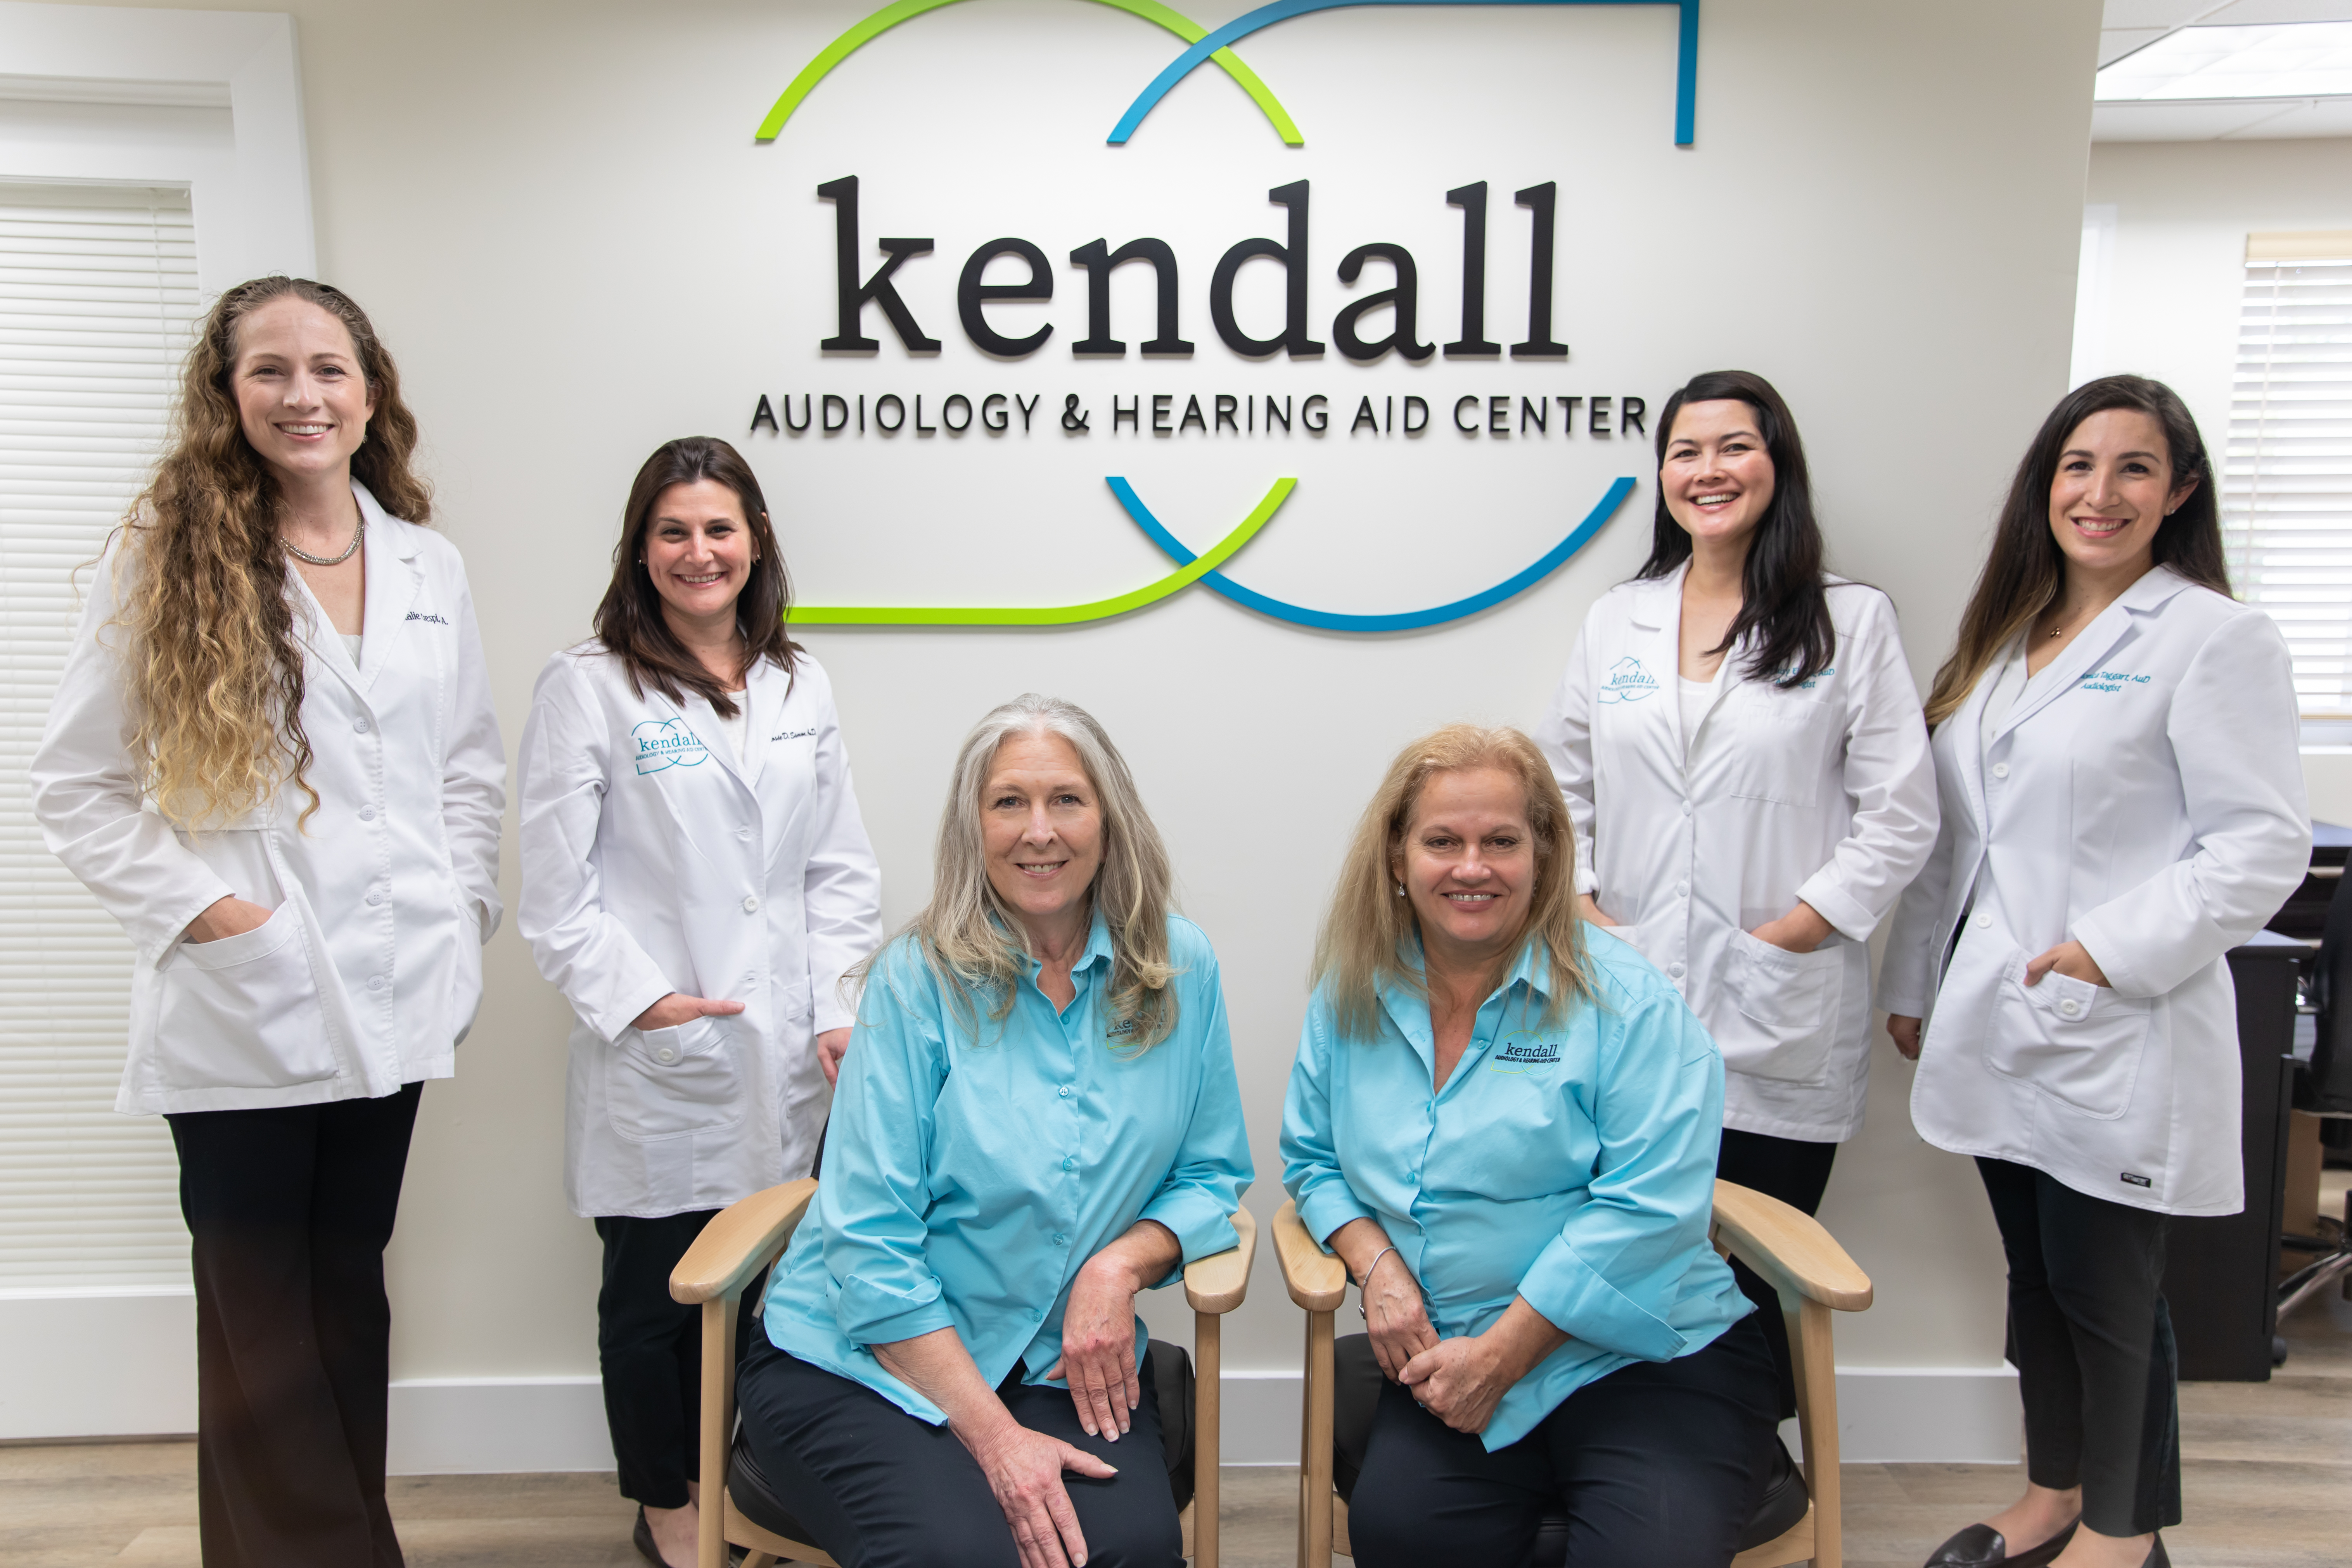 Kendall Audiology staff in Kendall, FL